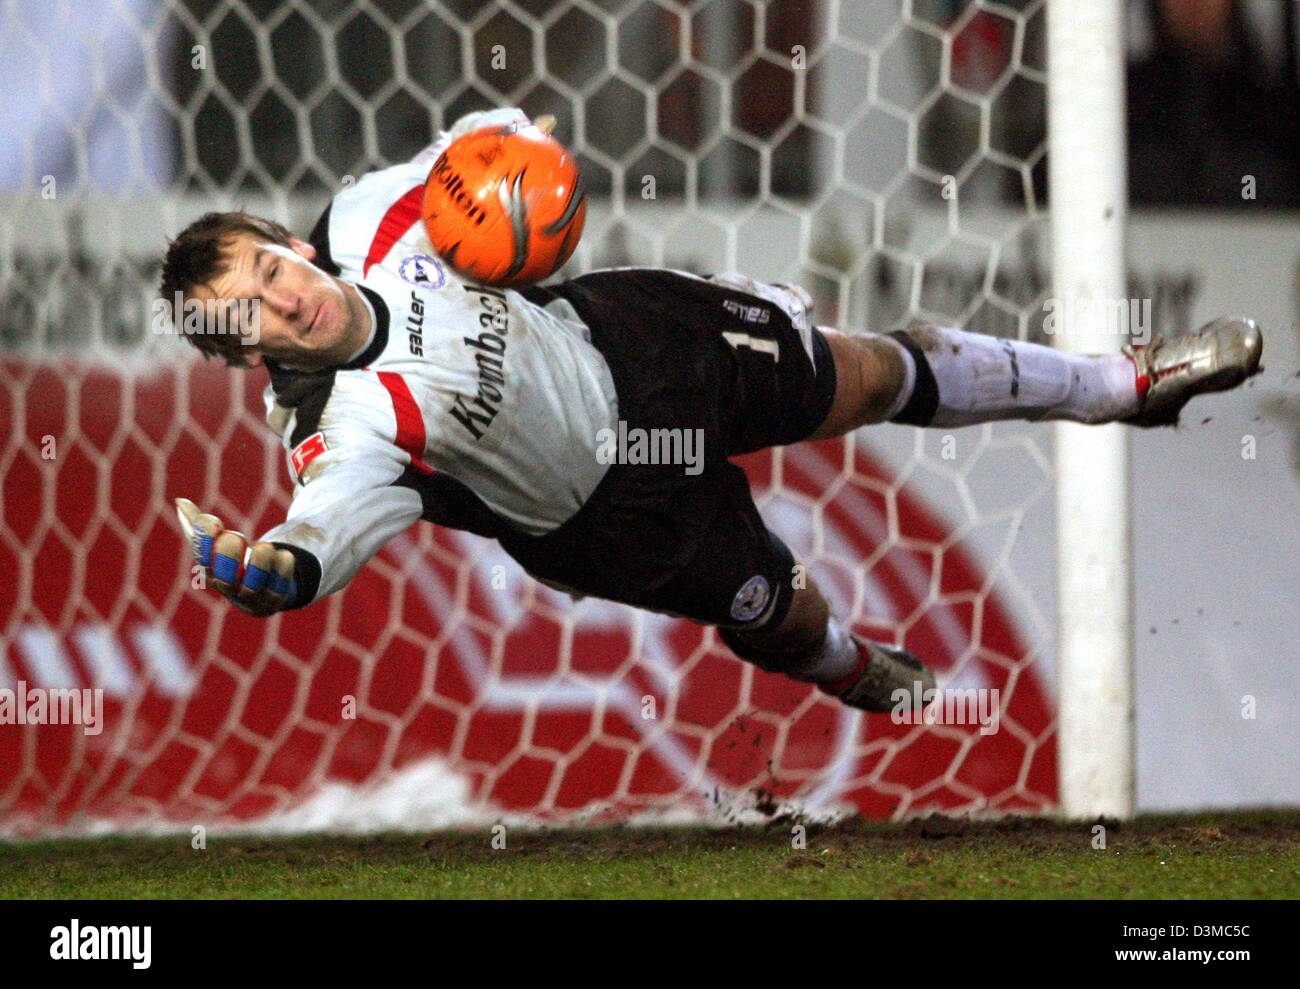 Arminia Bielefeld's goalkeeper Mathias Hain saves a penalty during the German Cup quarter-finals soccer match against Kickers Offenbach at the Schueco Arena stadium in Bielefeld, Germany, Wednesday 25 January 2006. Around12,000 spectators watched Bielefeld advance to the semi-finals after a penalty shoot-out. Photo: Franz-Peter Tschauner Stock Photo